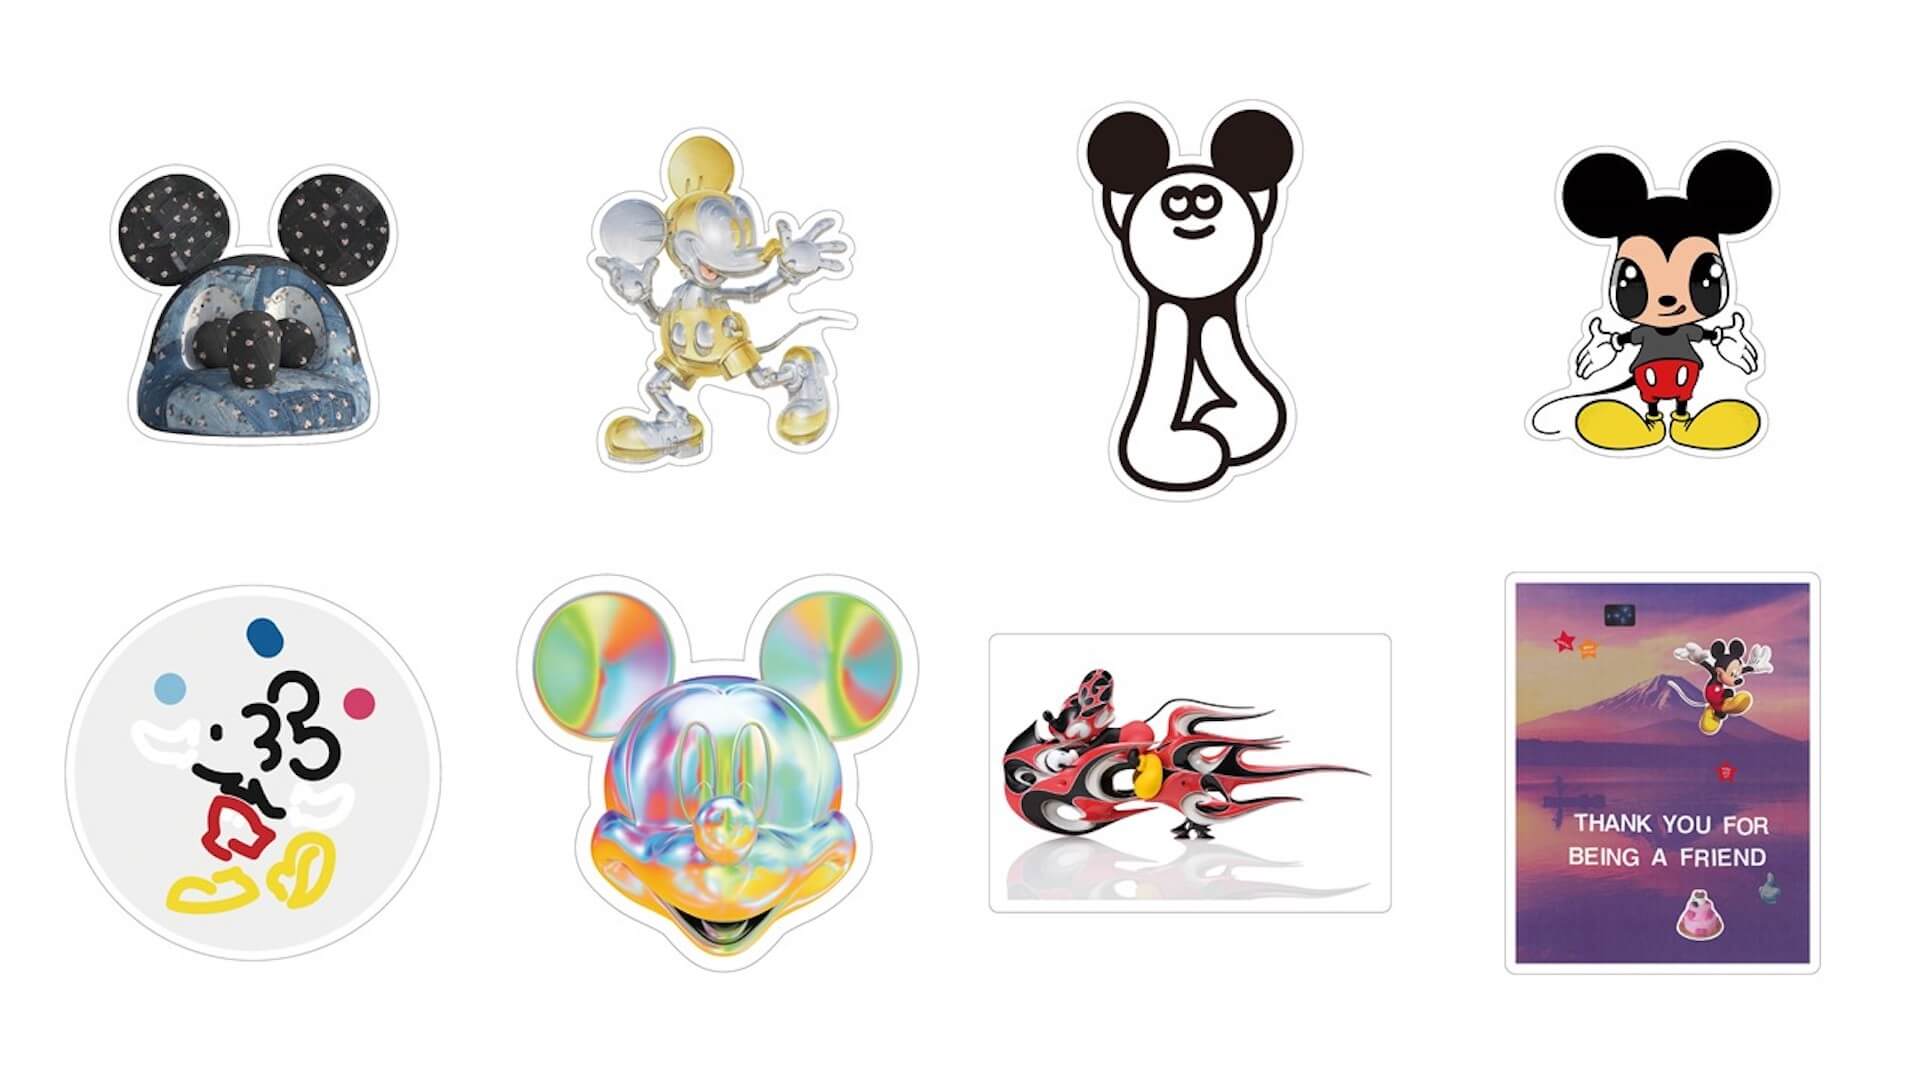 PARCO MUSEUM TOKYOにて＜Mickey Mouse Now and Future＞展が開催 